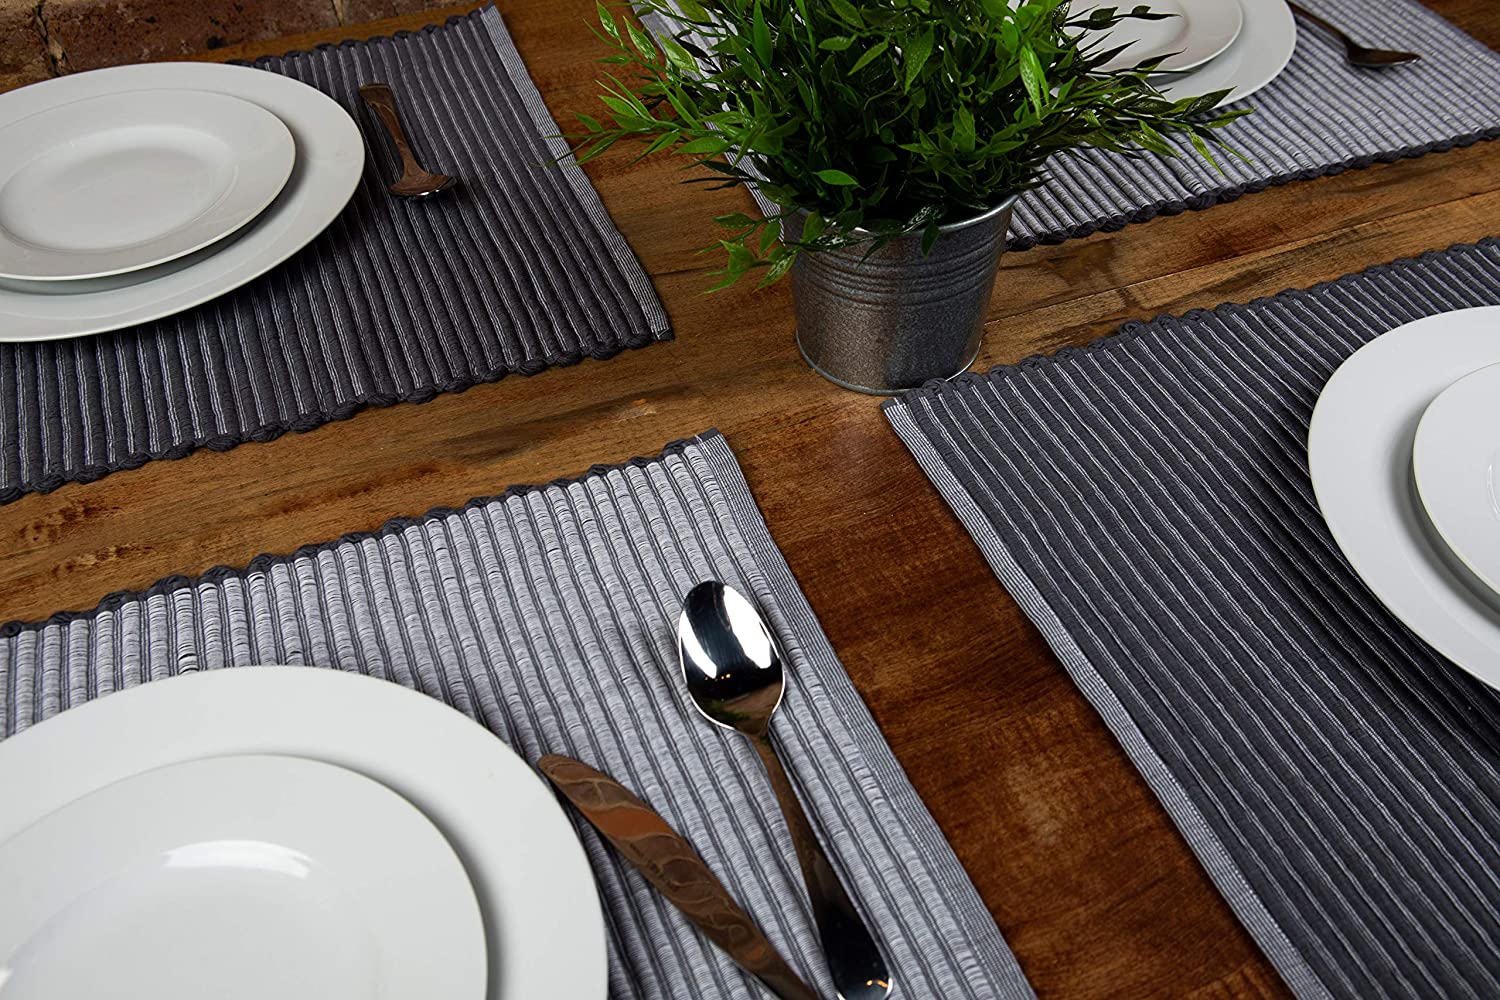 PIGCHCY Elegant Placemats with Matching Table Runner,Durable Cleaning  Placemats for Dining Table Sets(6pcs Placemats+1pcs Table Runner, Chocolate